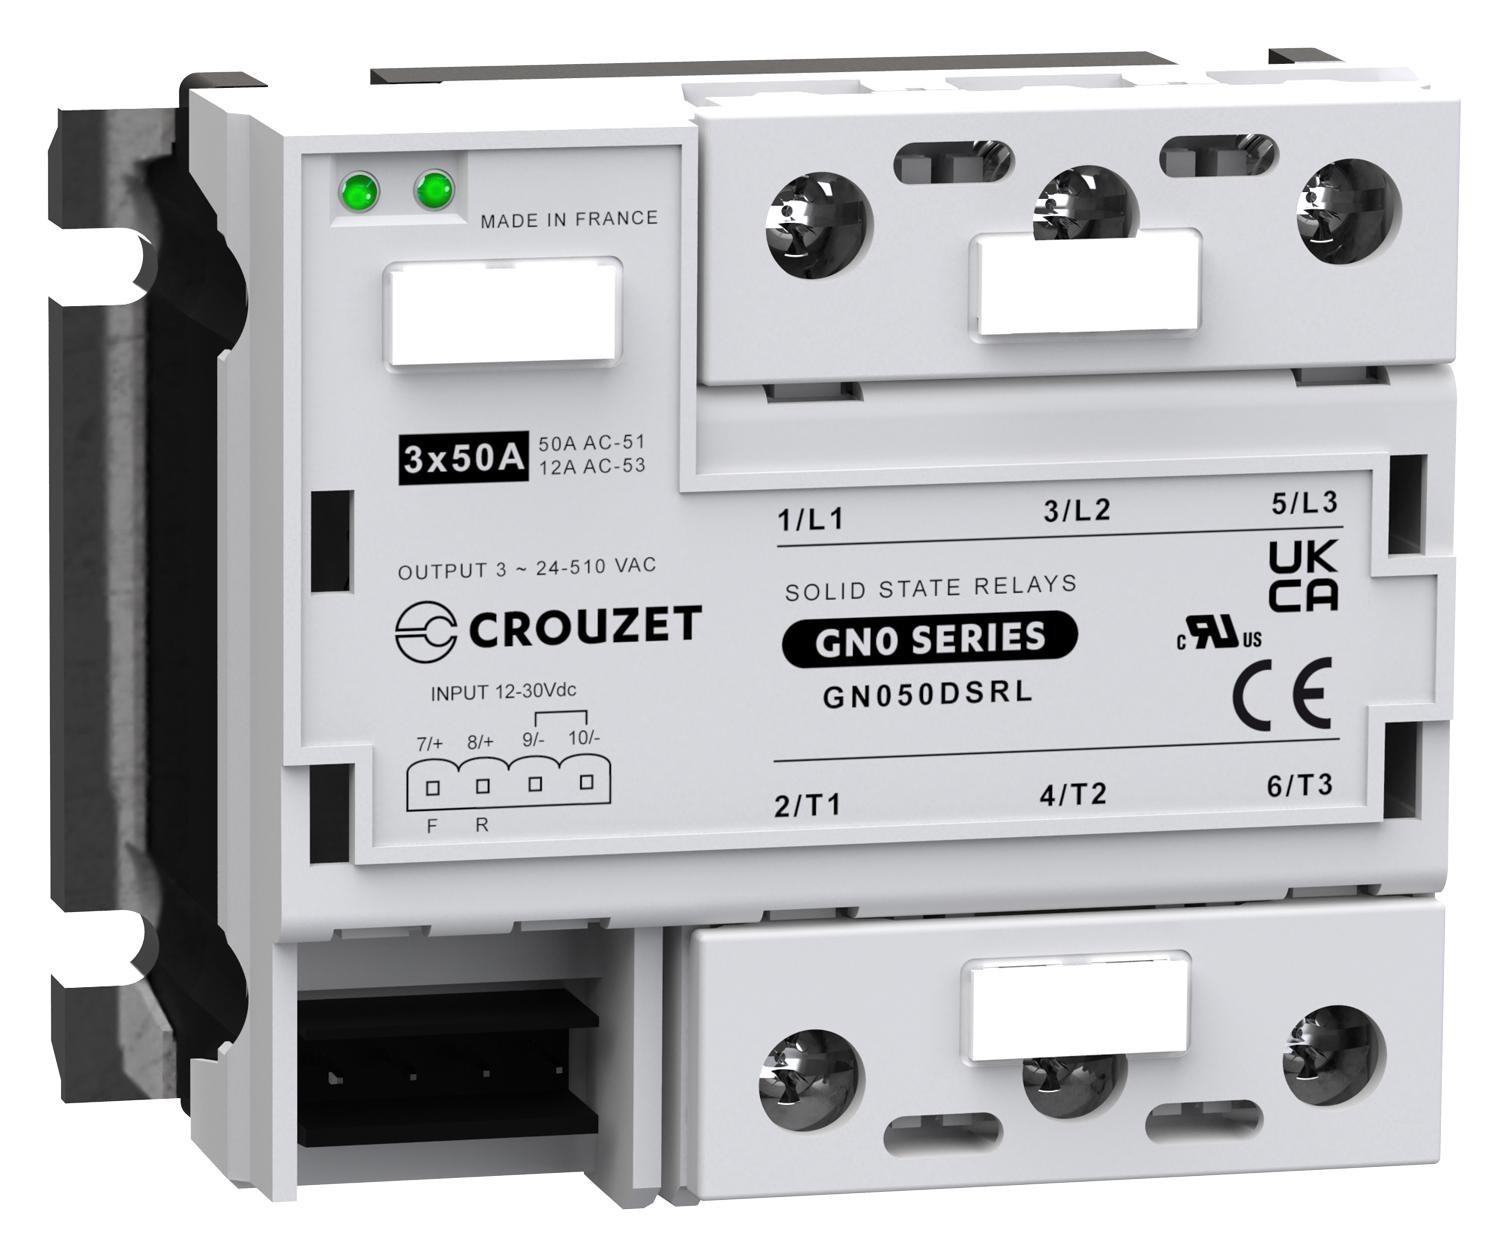 Crouzet Gn050Dsrl Solid State Relay, 50A, 12-30Vdc, Panel